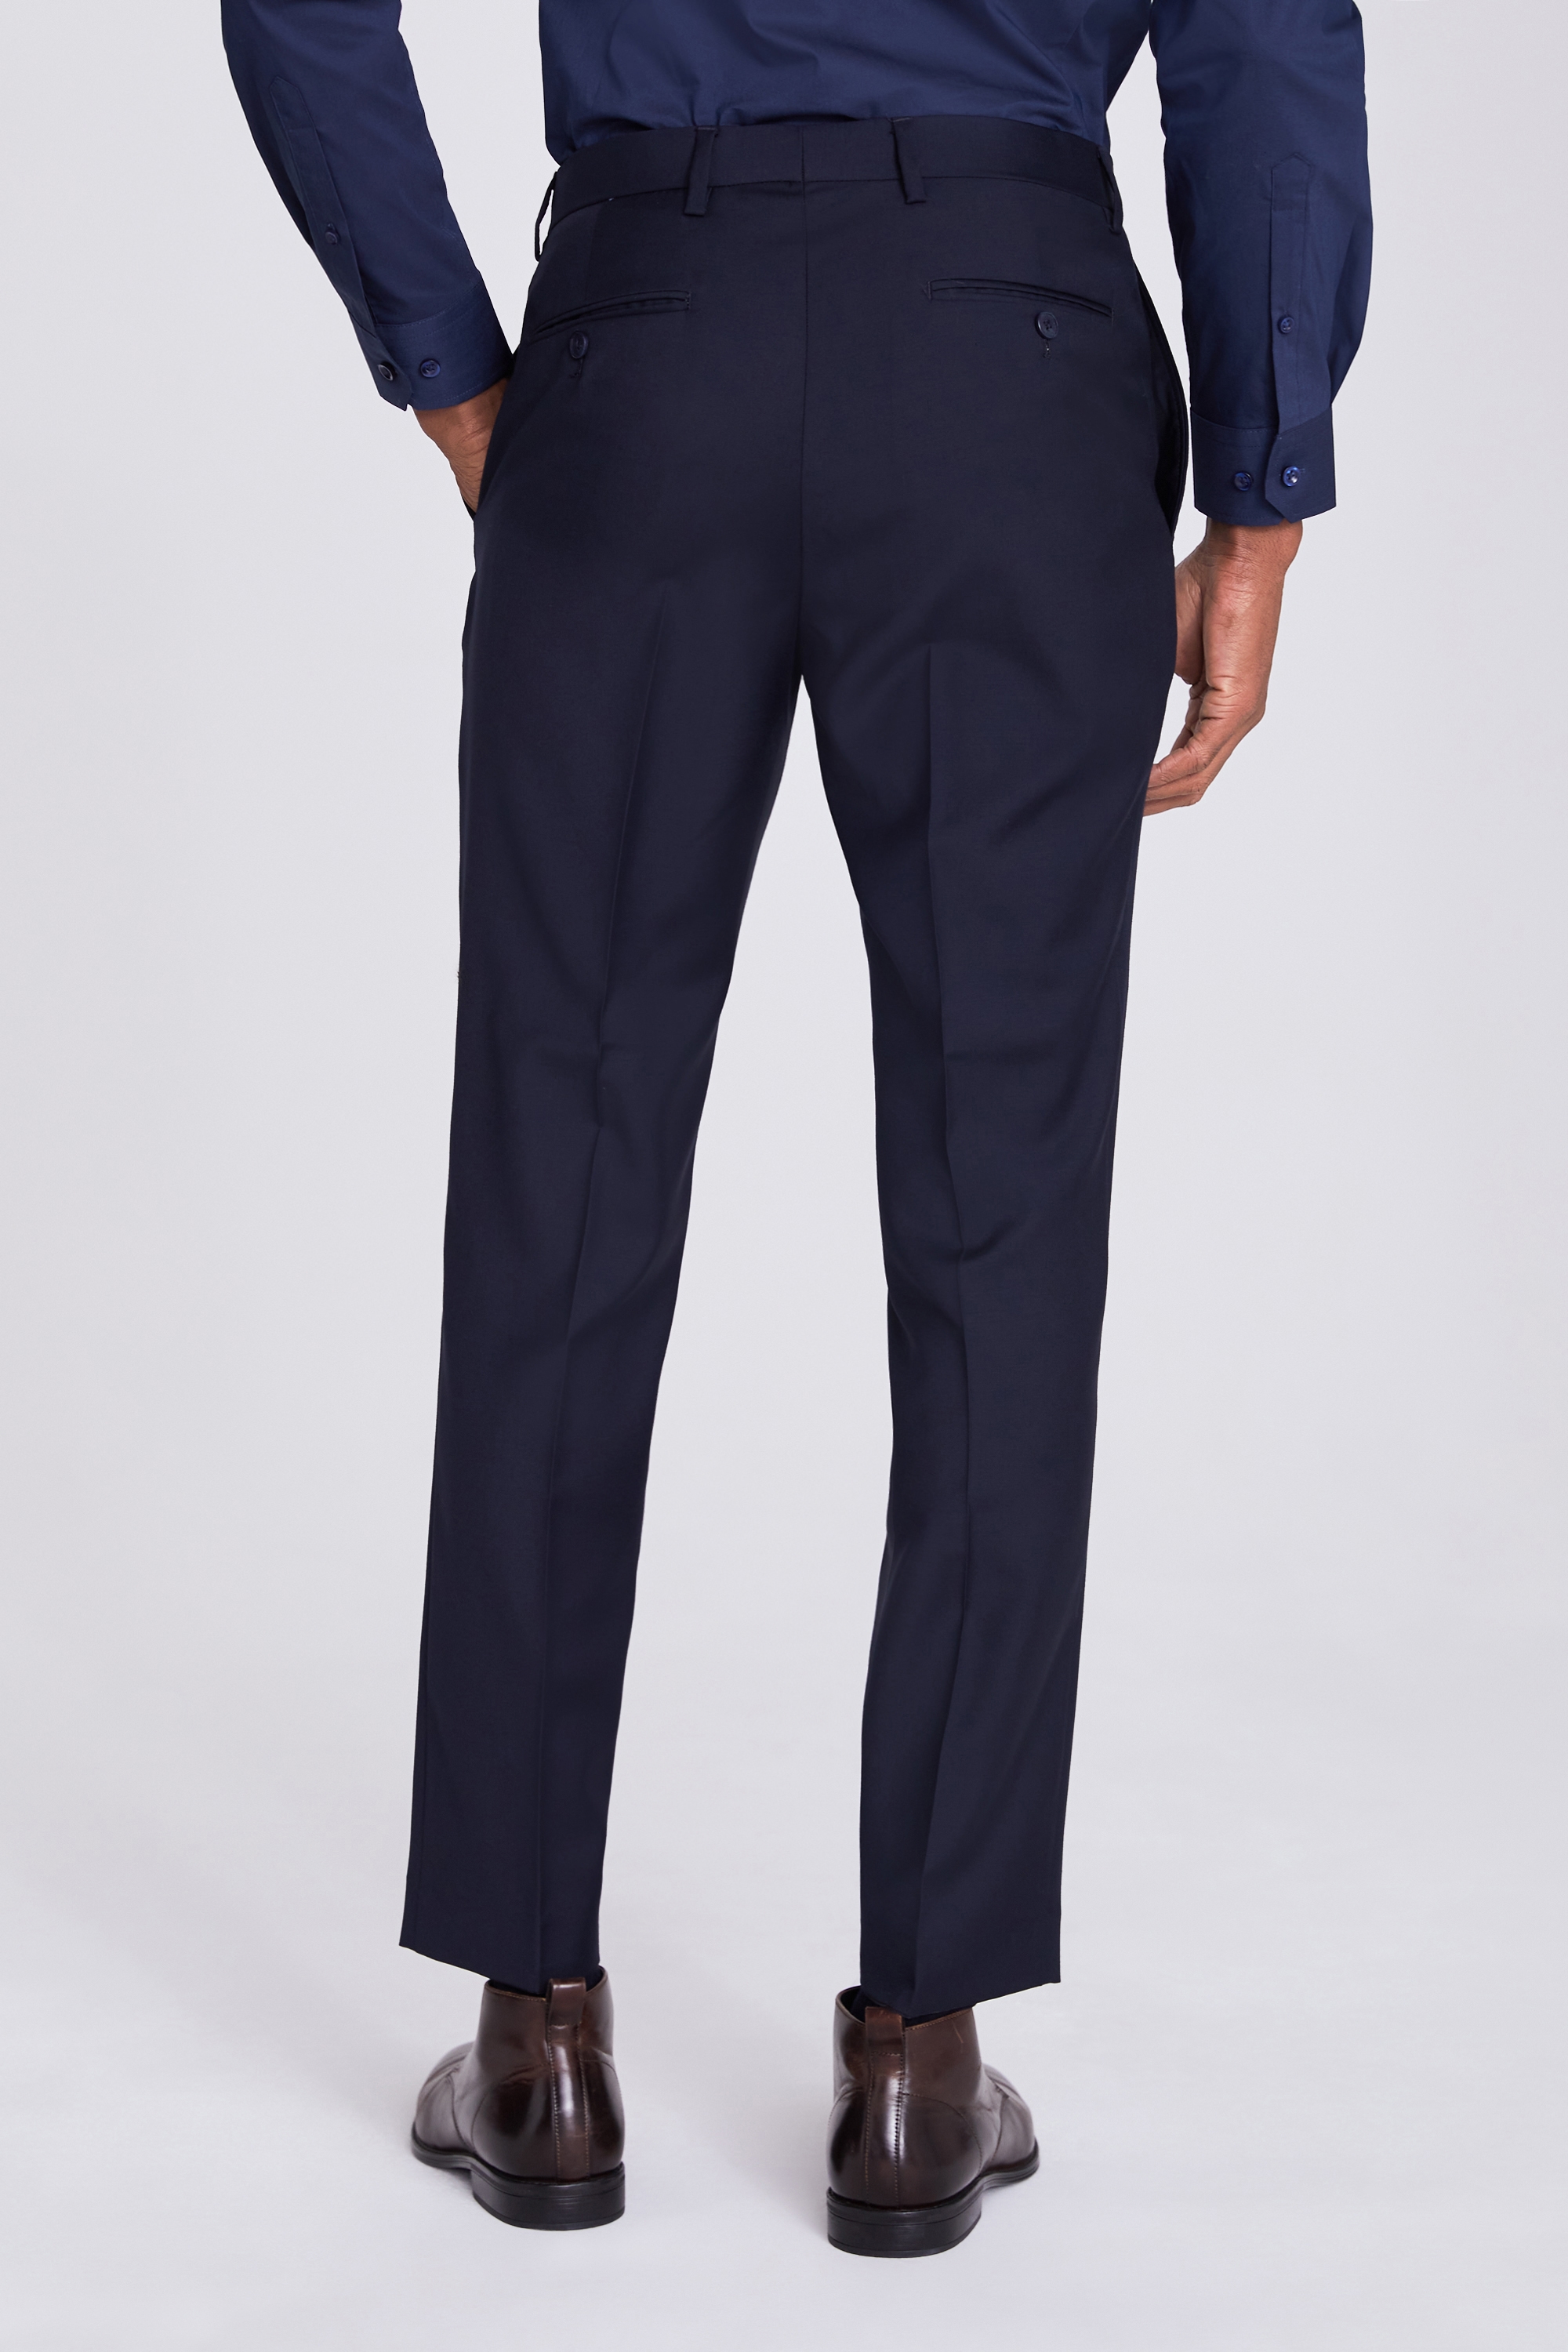 Tailored Fit Navy Wool Trousers | Buy Online at Moss